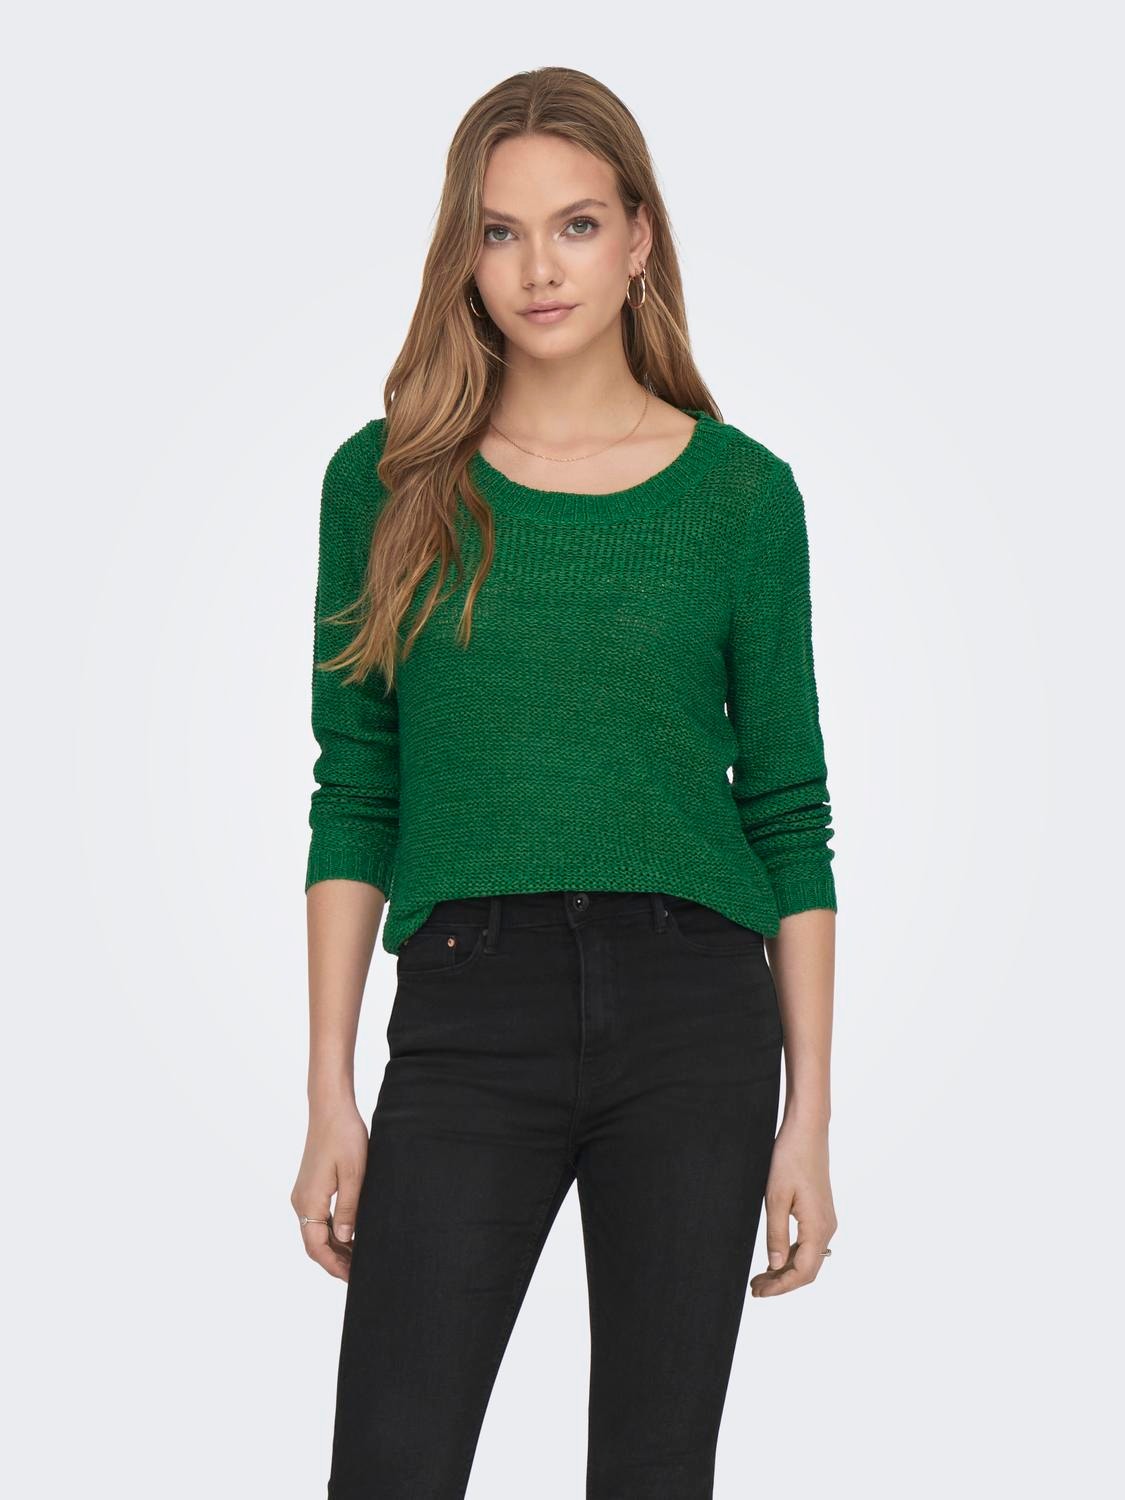 ONLY O-hals Pullover -Abundant Green - 15113356